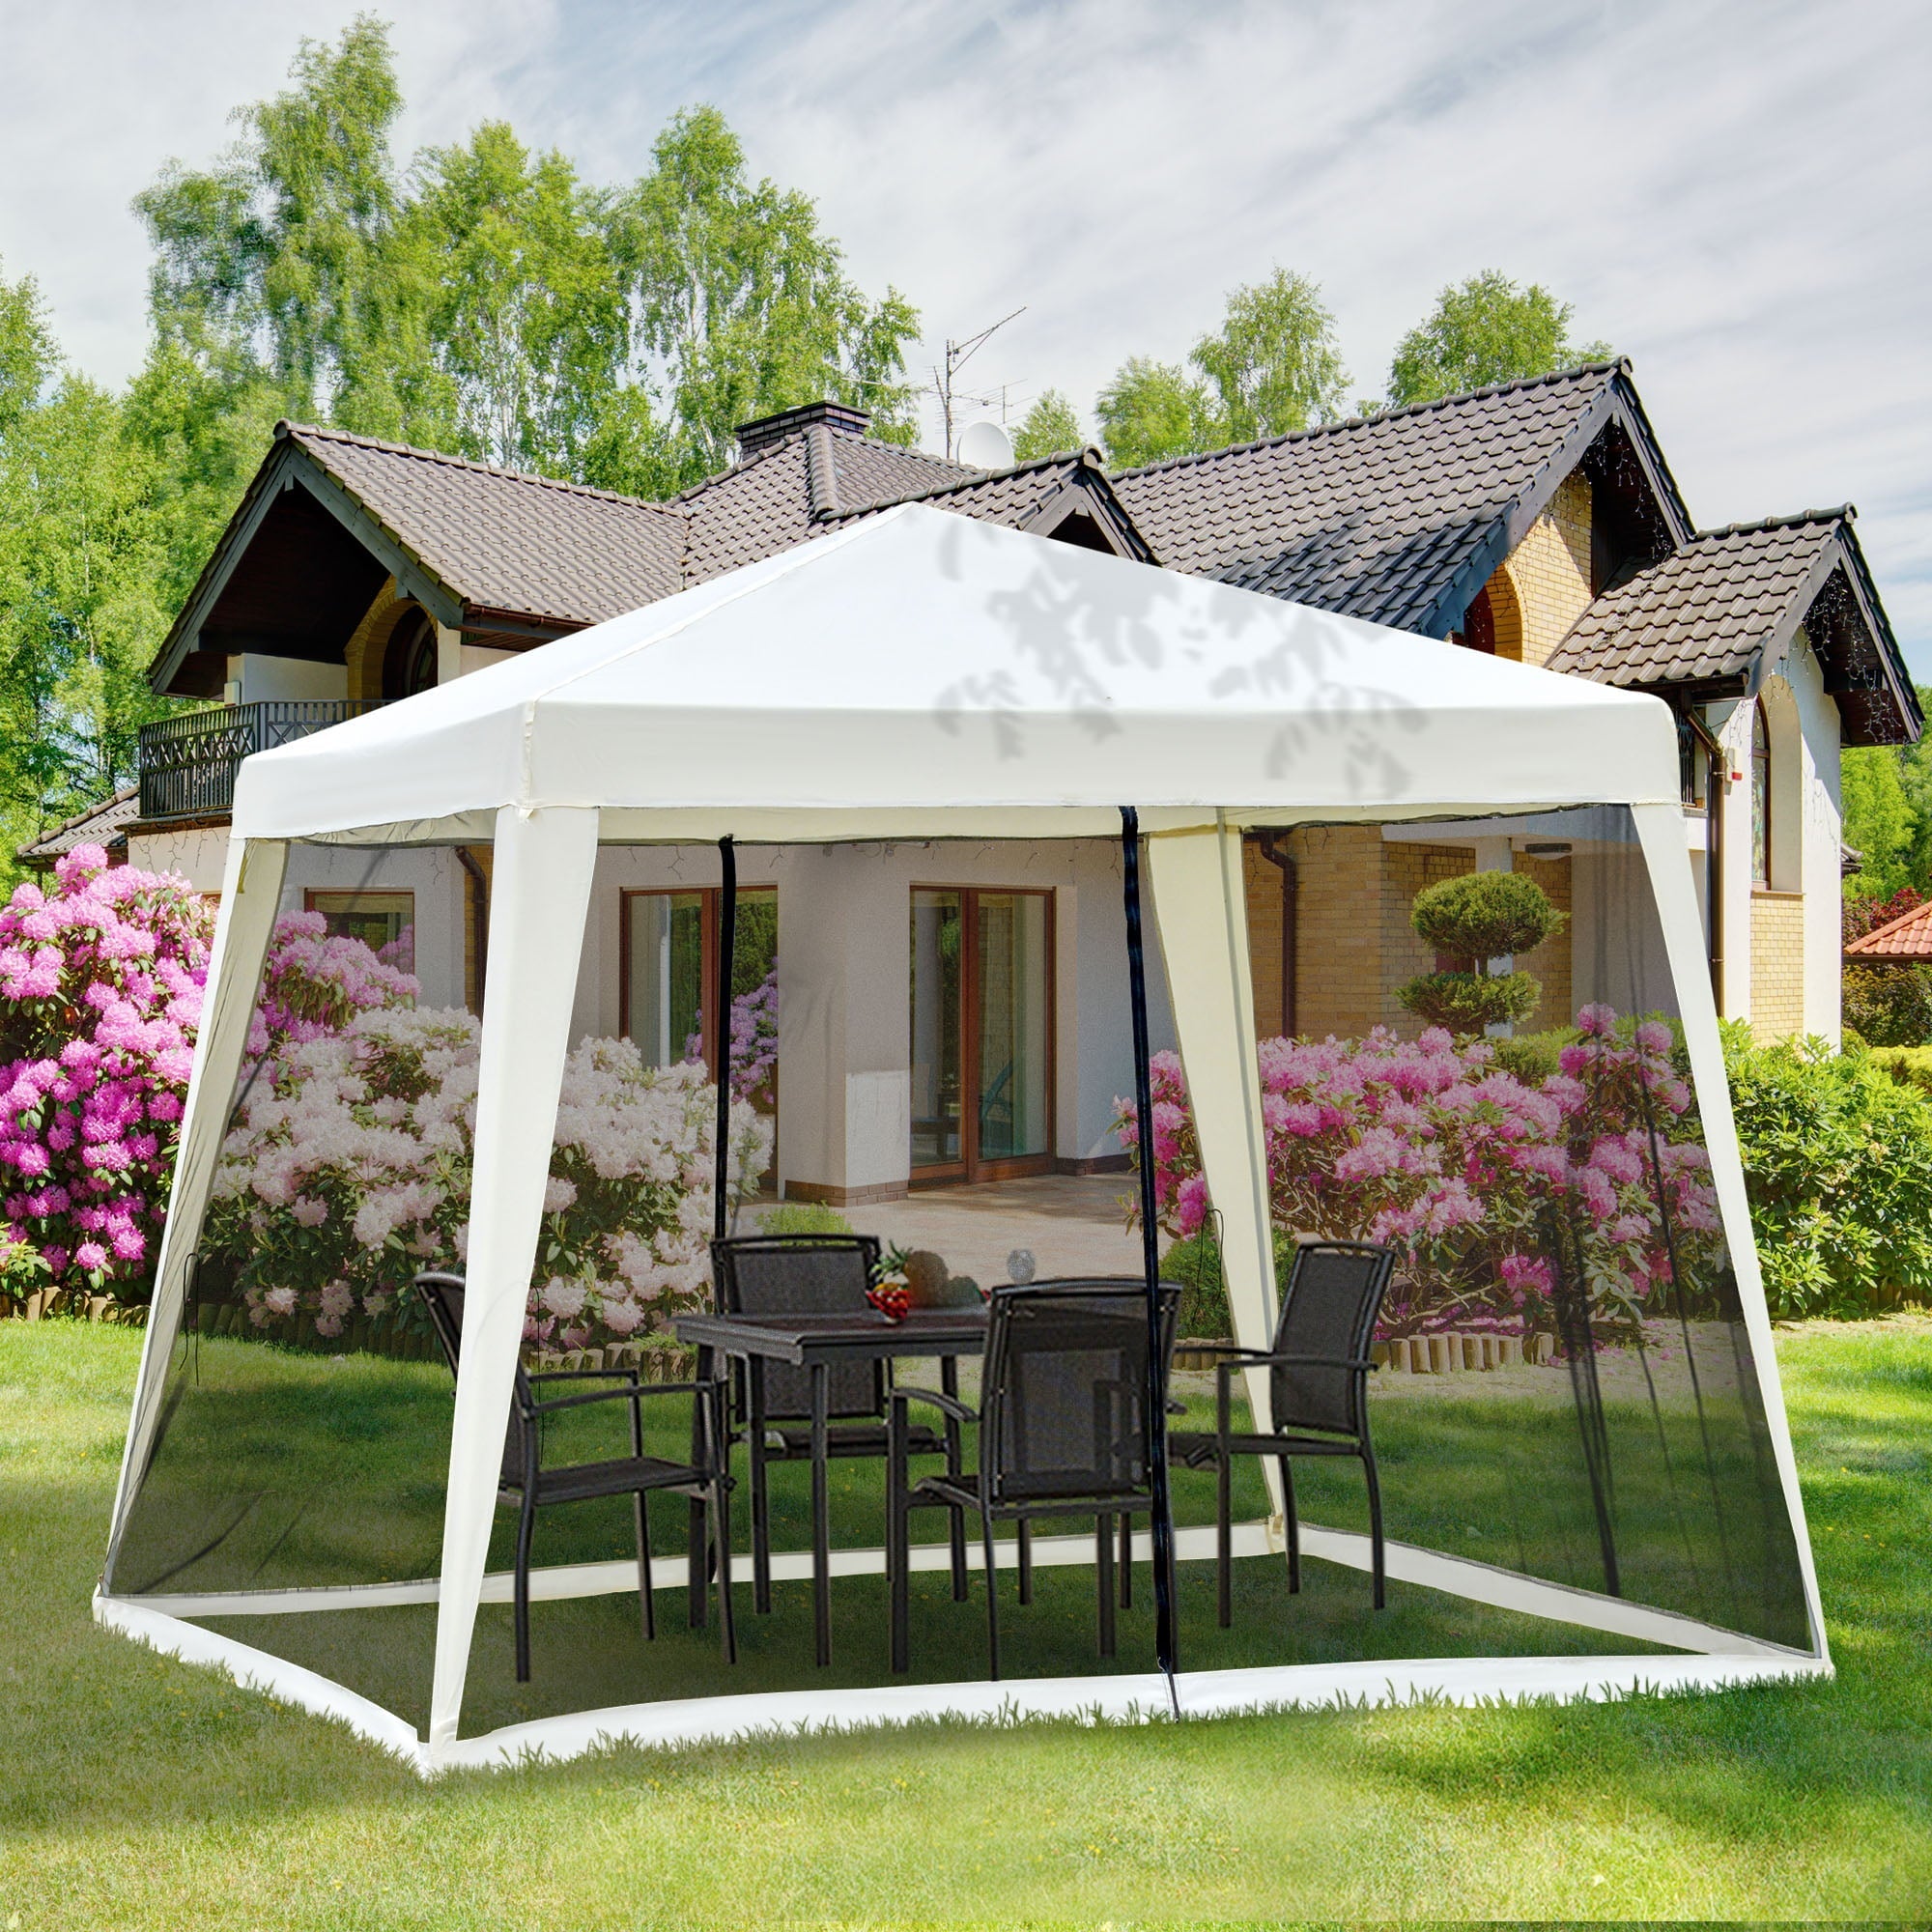 Outsunny Outdoor Sun Shade Gazebo Canopy Tent with Mesh Screen Walls Beige, Cabanas, 10 ft Width